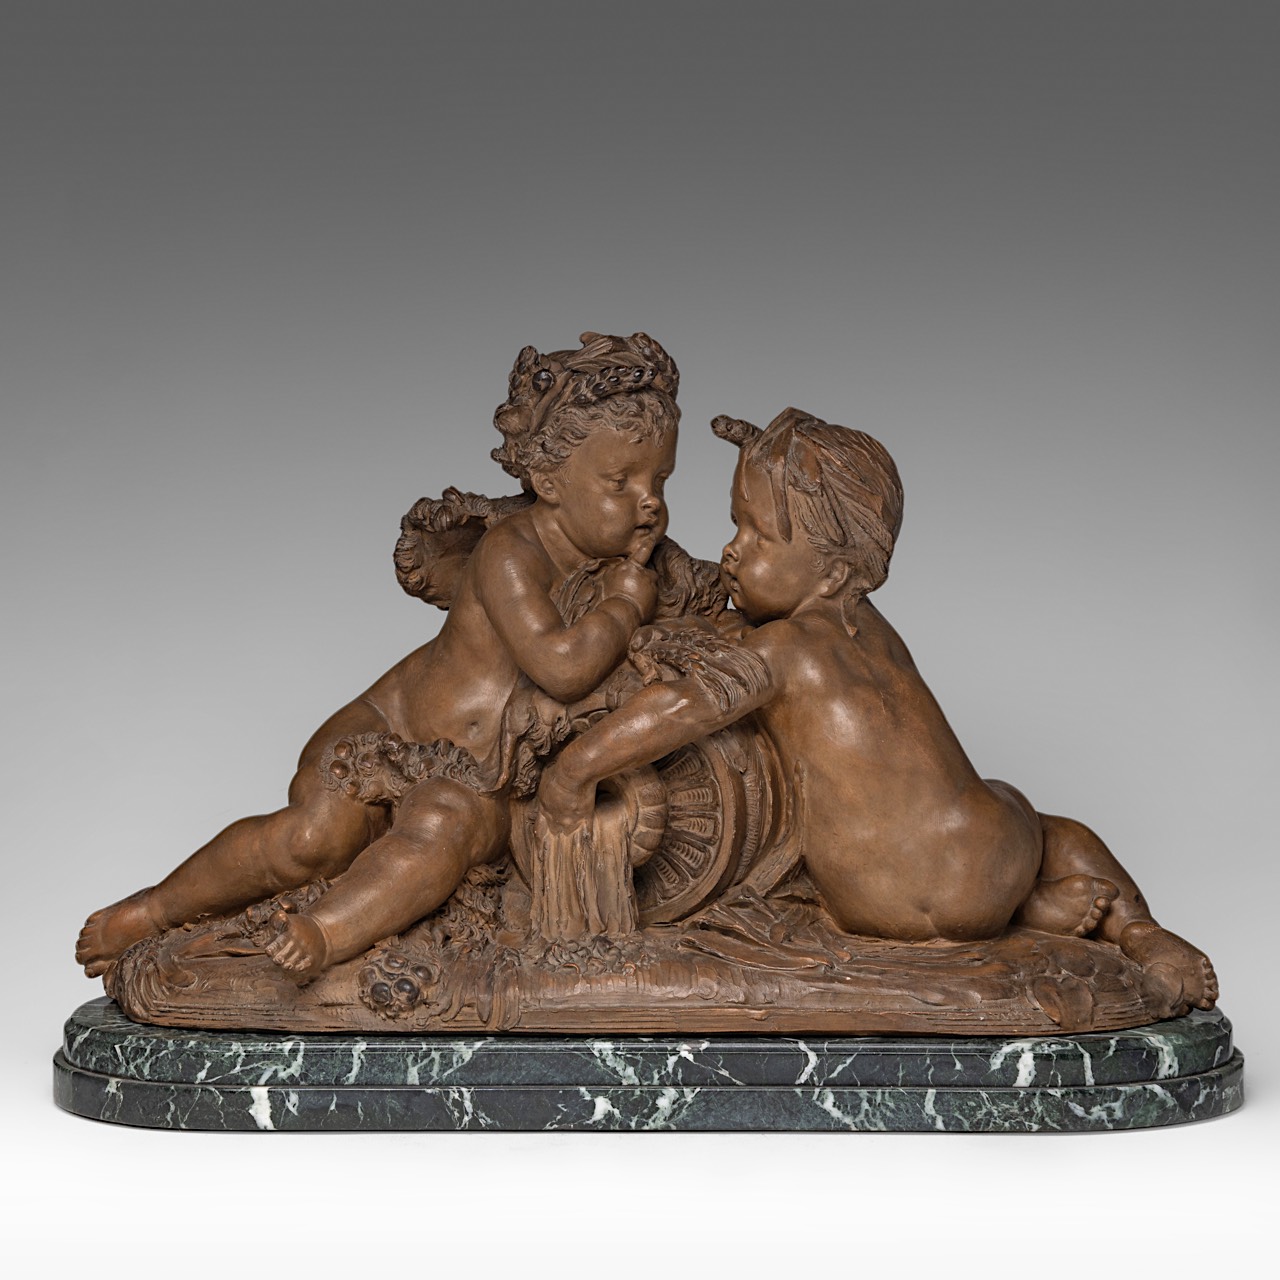 Carrier-Belleuse (1824-1887), two putti by the fountain, terracotta on a marble base, H 43 - W 68 cm